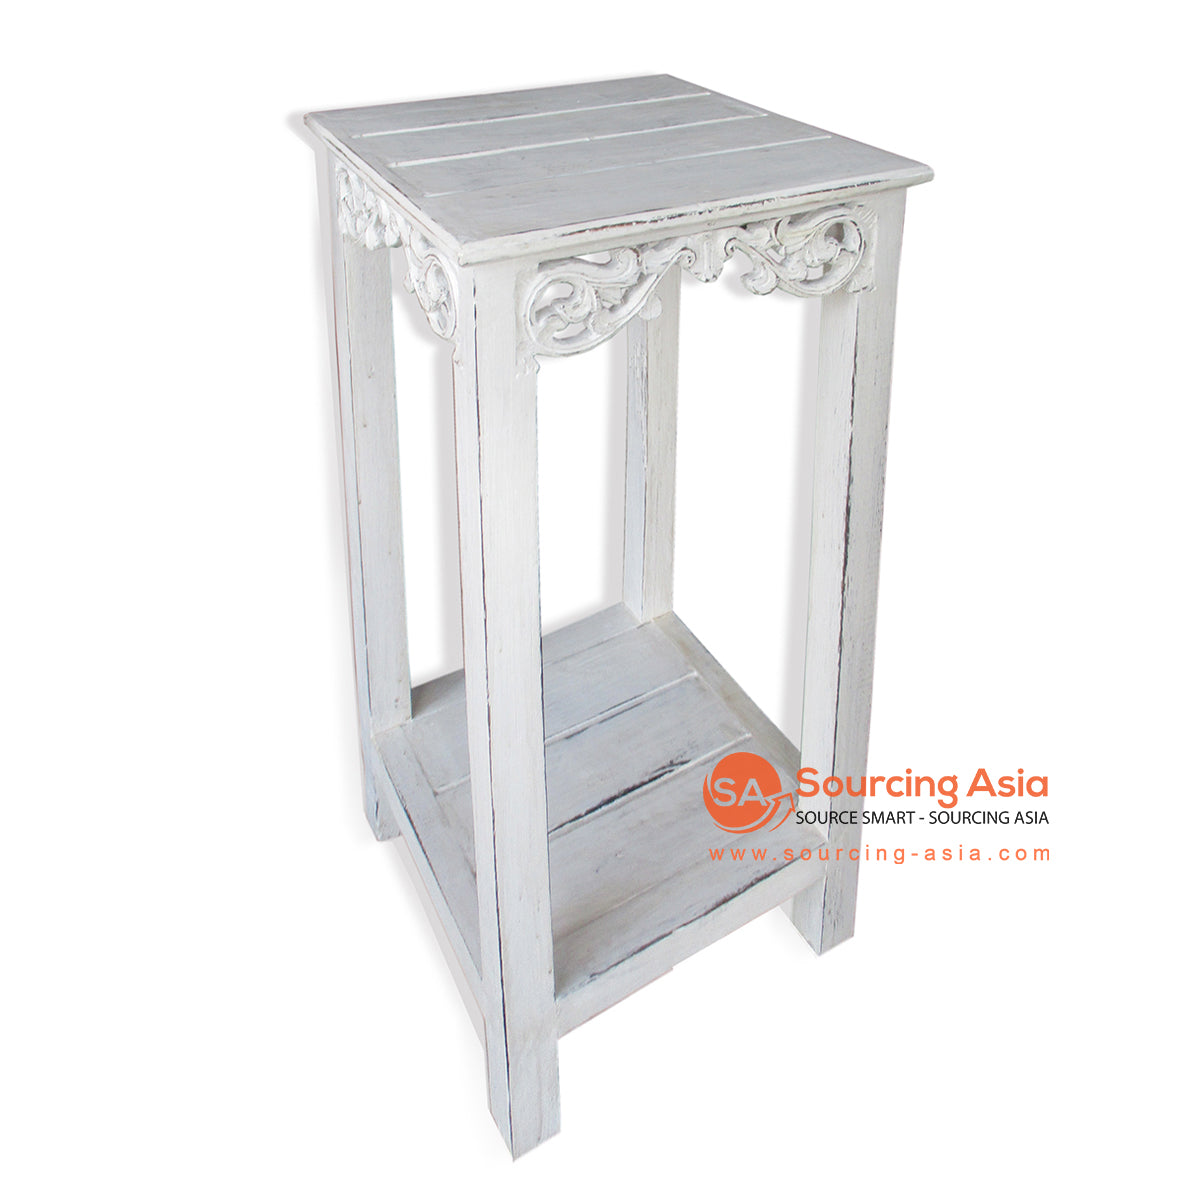 THE007M MEDIUM WHITE WASH WOODEN CONSOLE TABLE